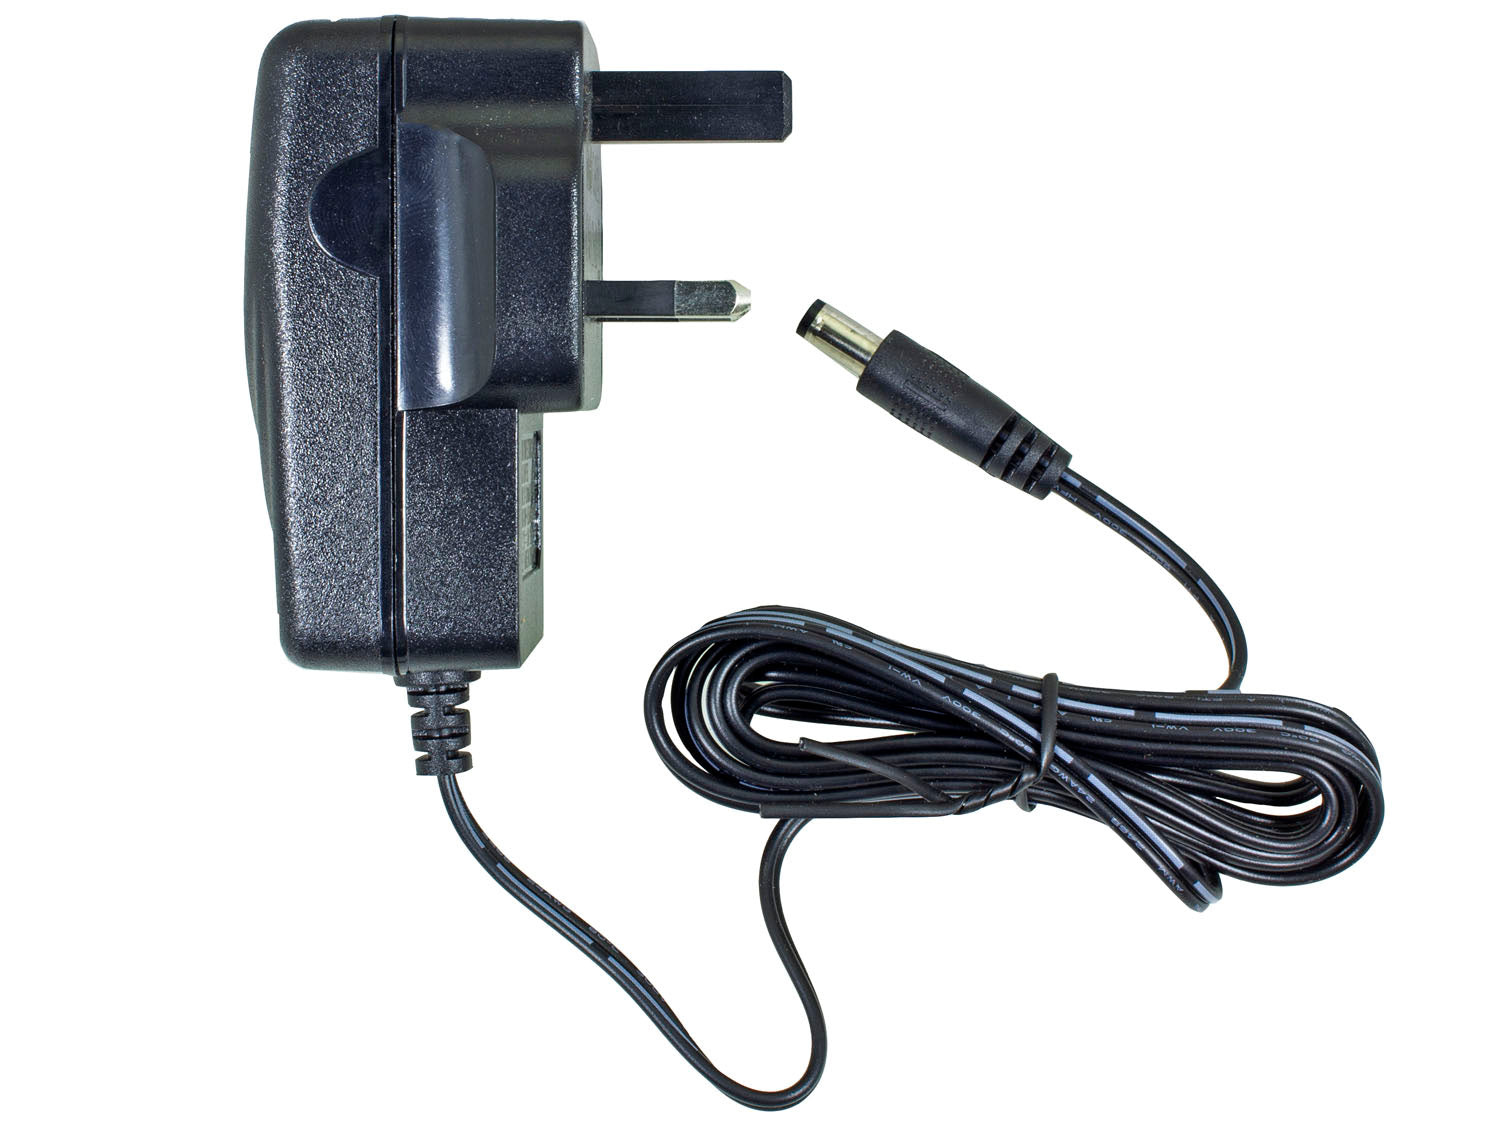 12V 1A DC UK Power Supply – 3 Metre Cable